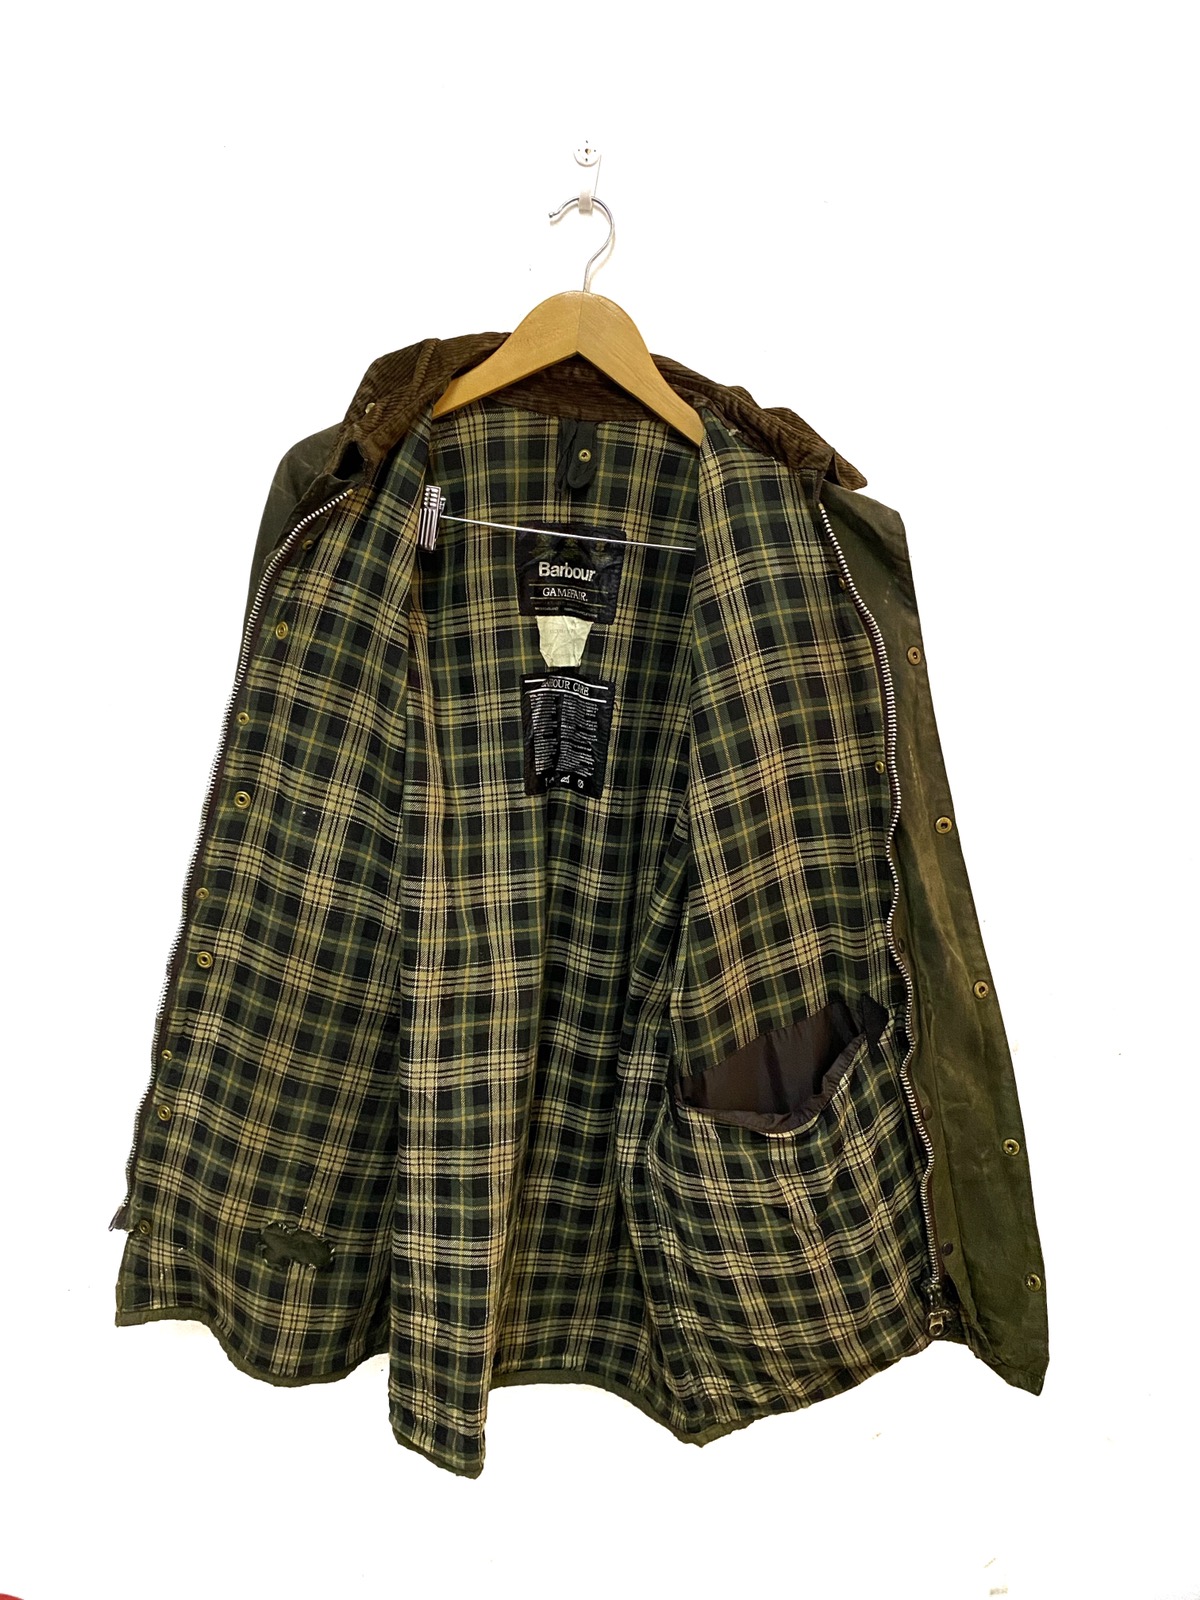 Barbour Gamefair Waxed Jacket Made in England - 10